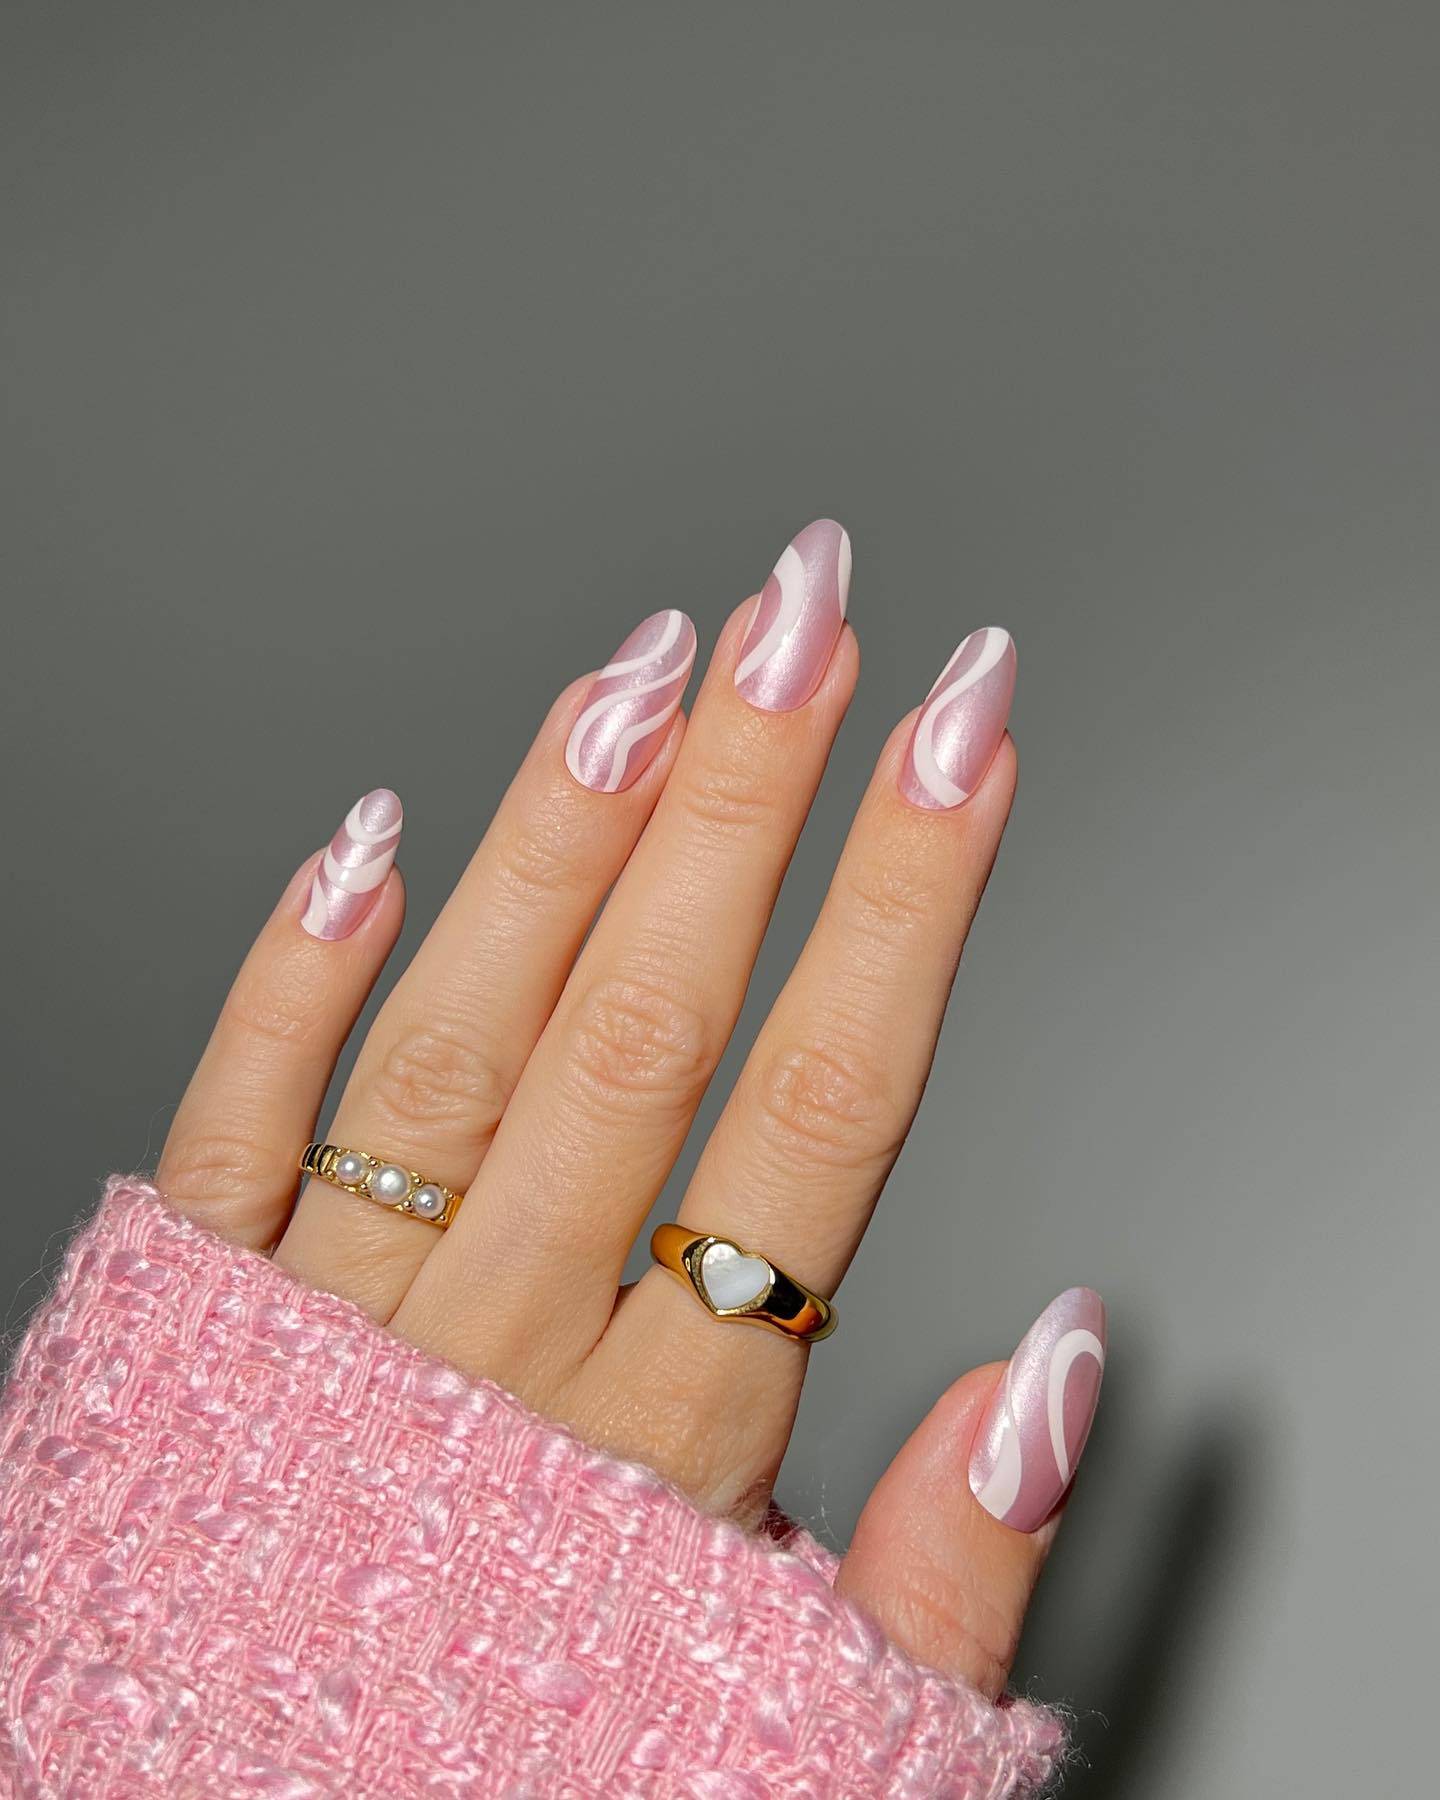 30 Chic Chrome Nail Designs For The Ultimate Glam Look - 247